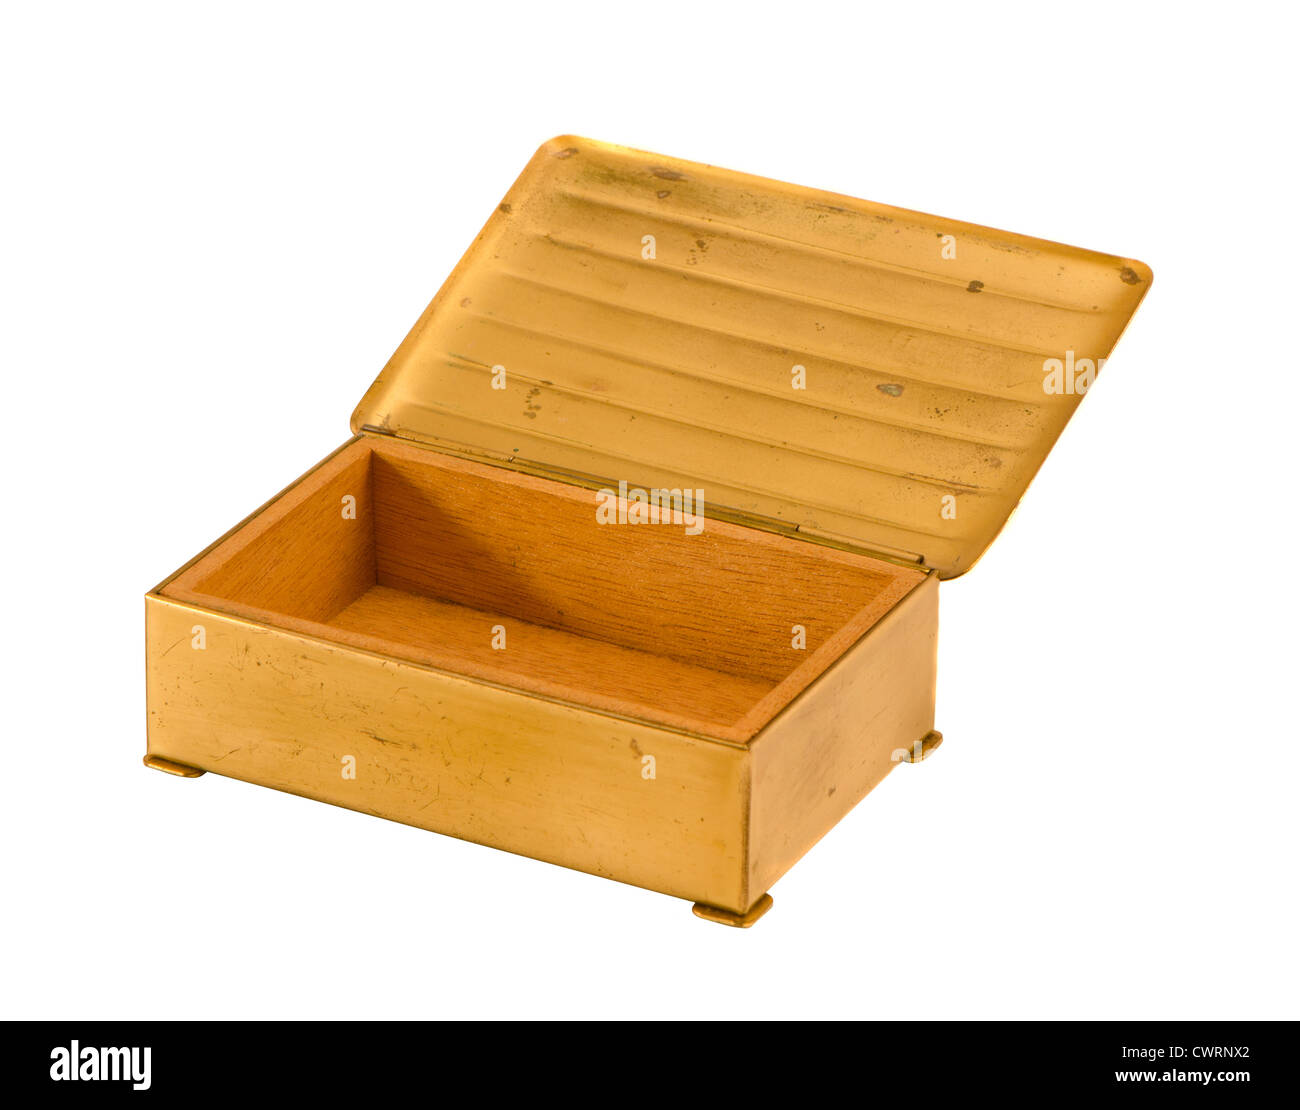 Gold color metal wooden antique jewelry box with open lid isolated on white background Stock Photo